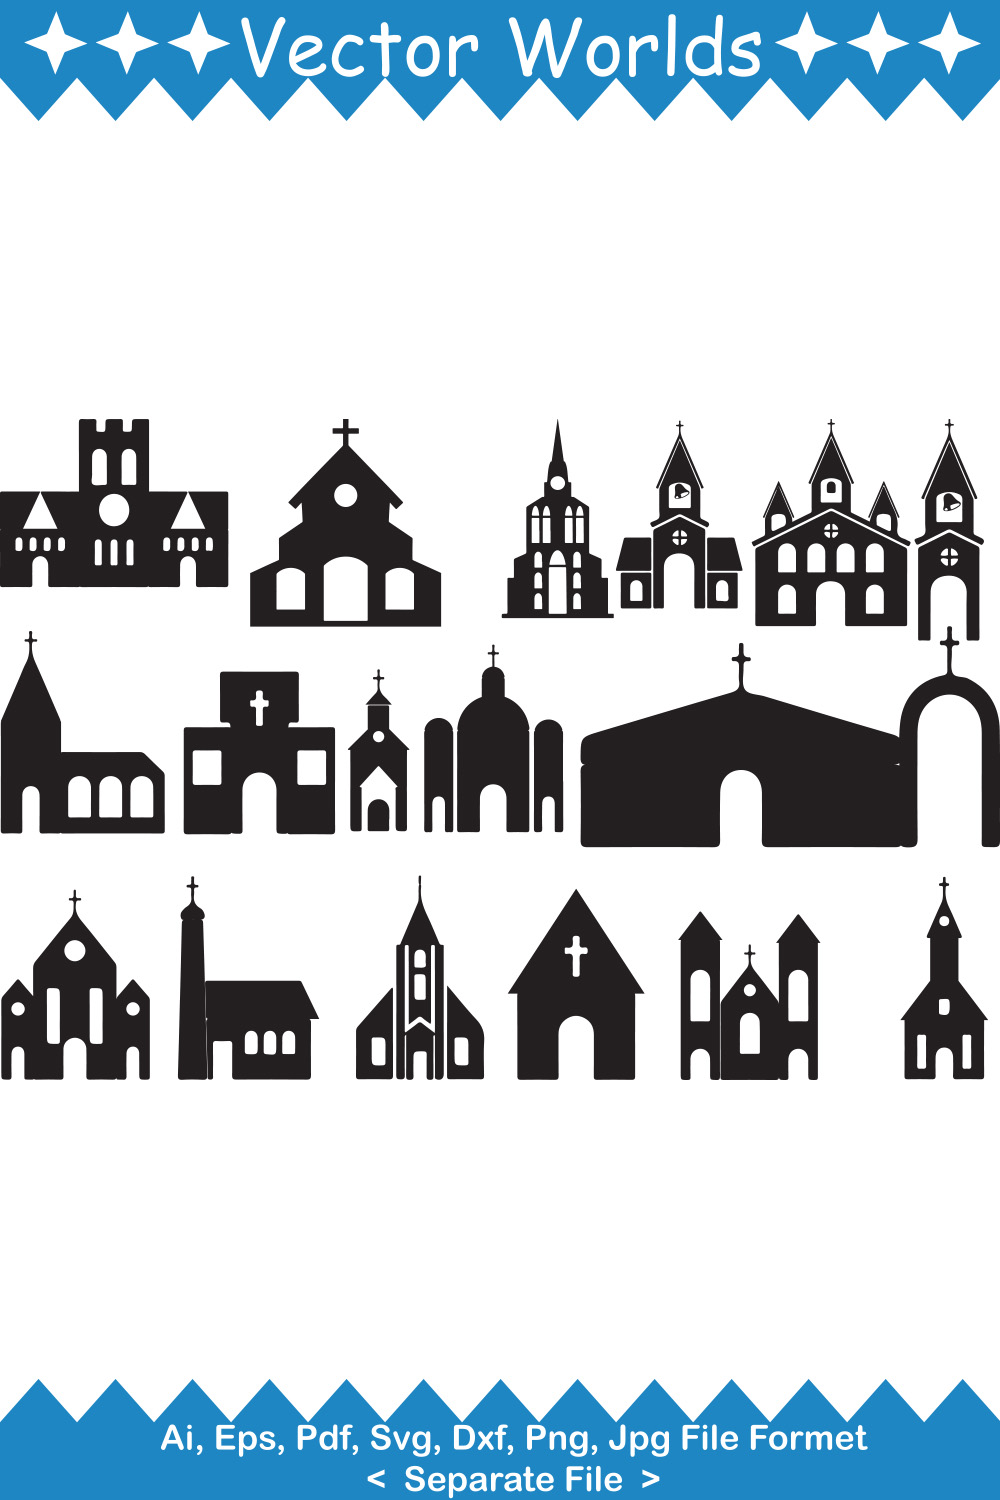 A selection of unique vector images of the silhouette of a Christian church.